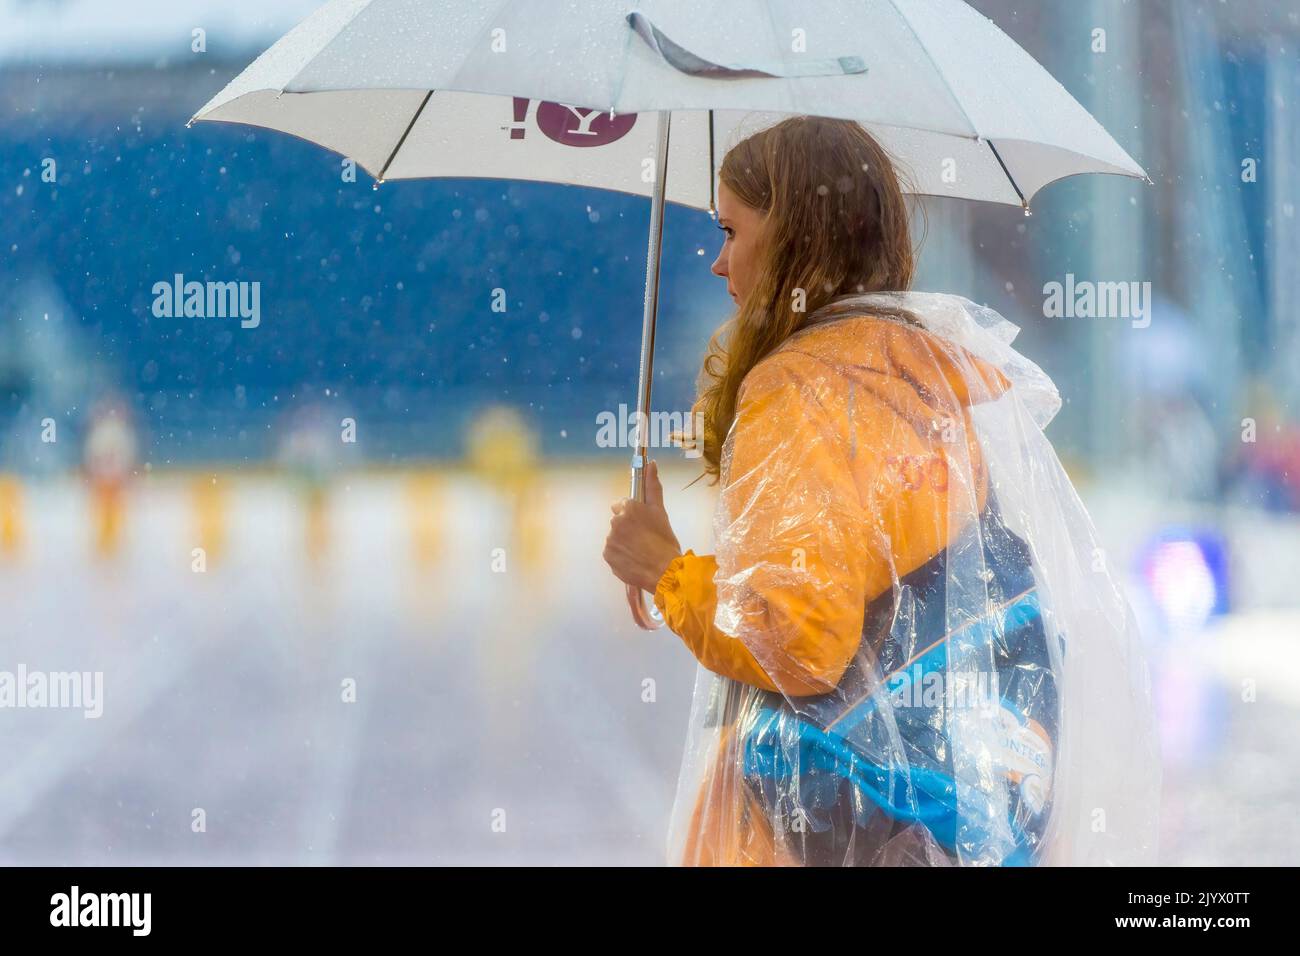 Volunteer woman in rainy weather during the Toronto Pan American Games 2015 Stock Photo